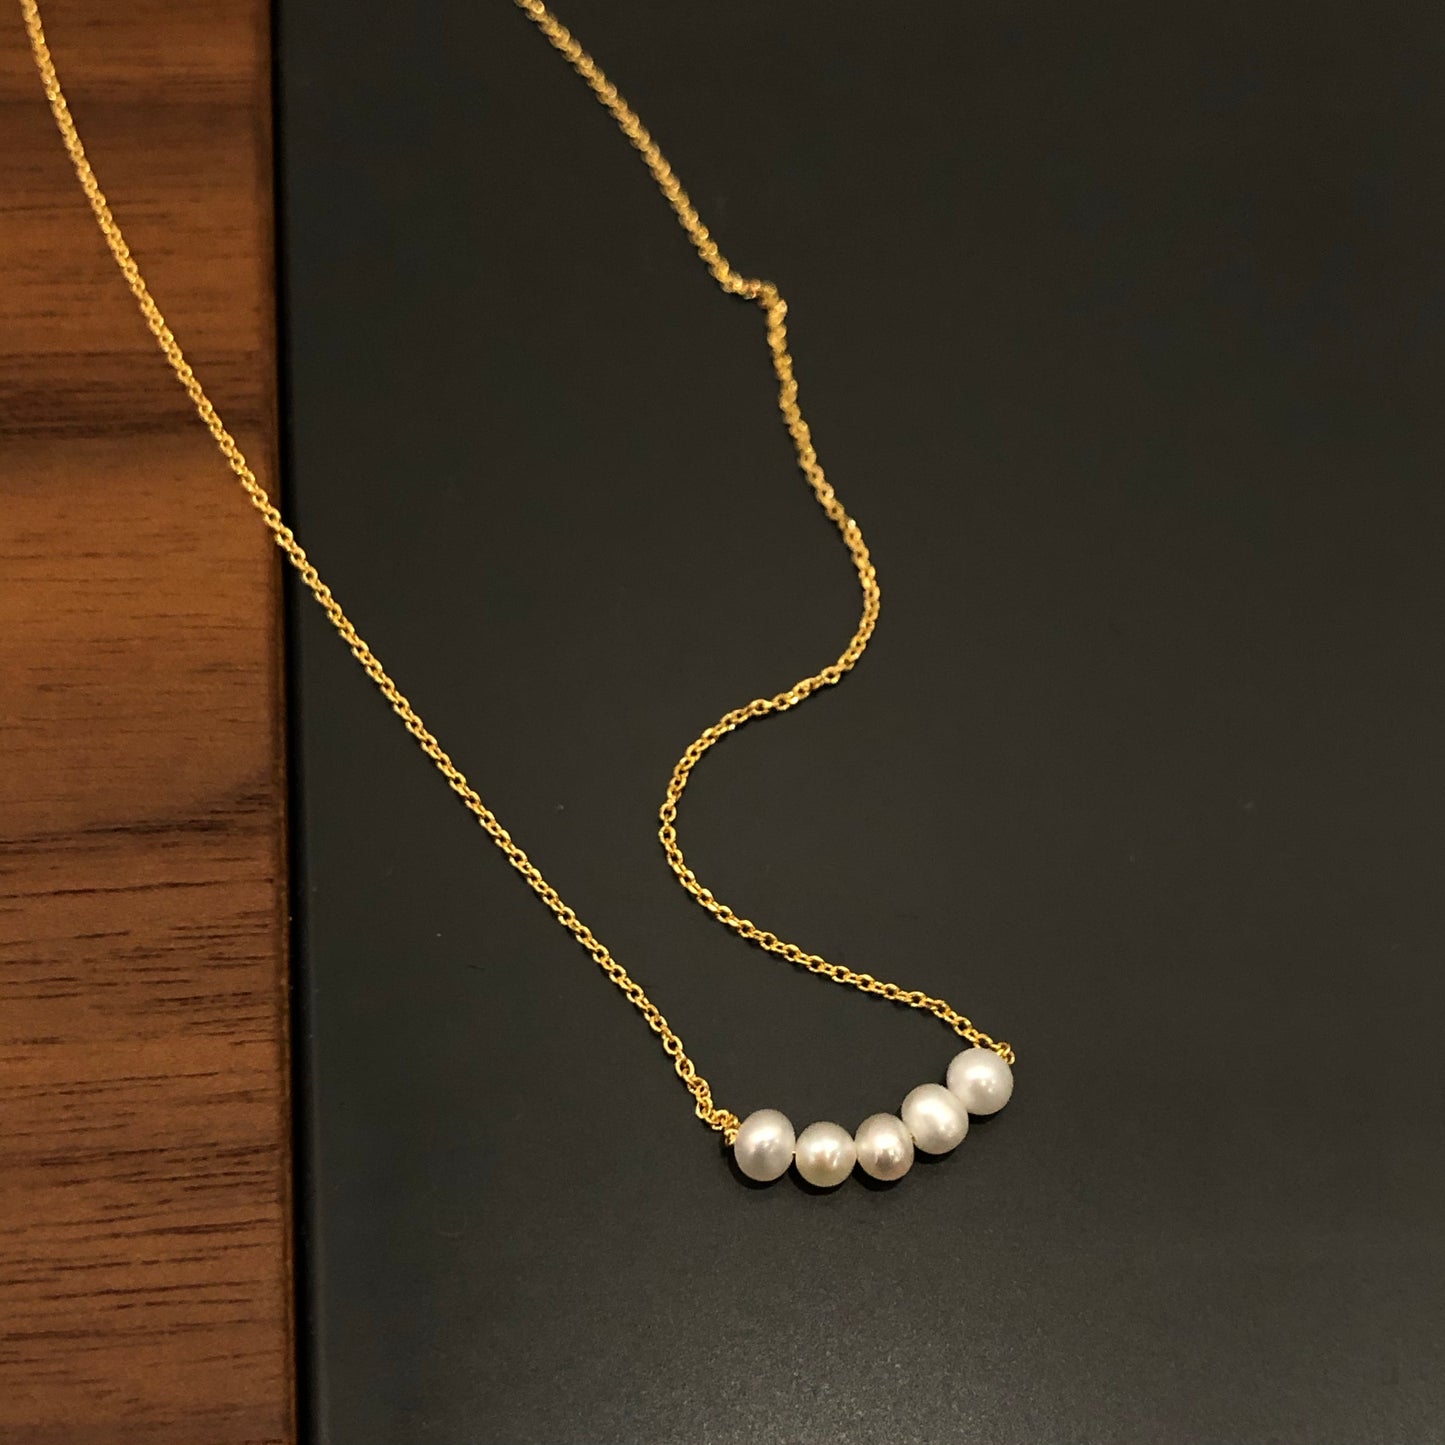 Tricia Pearl Necklace in Gold